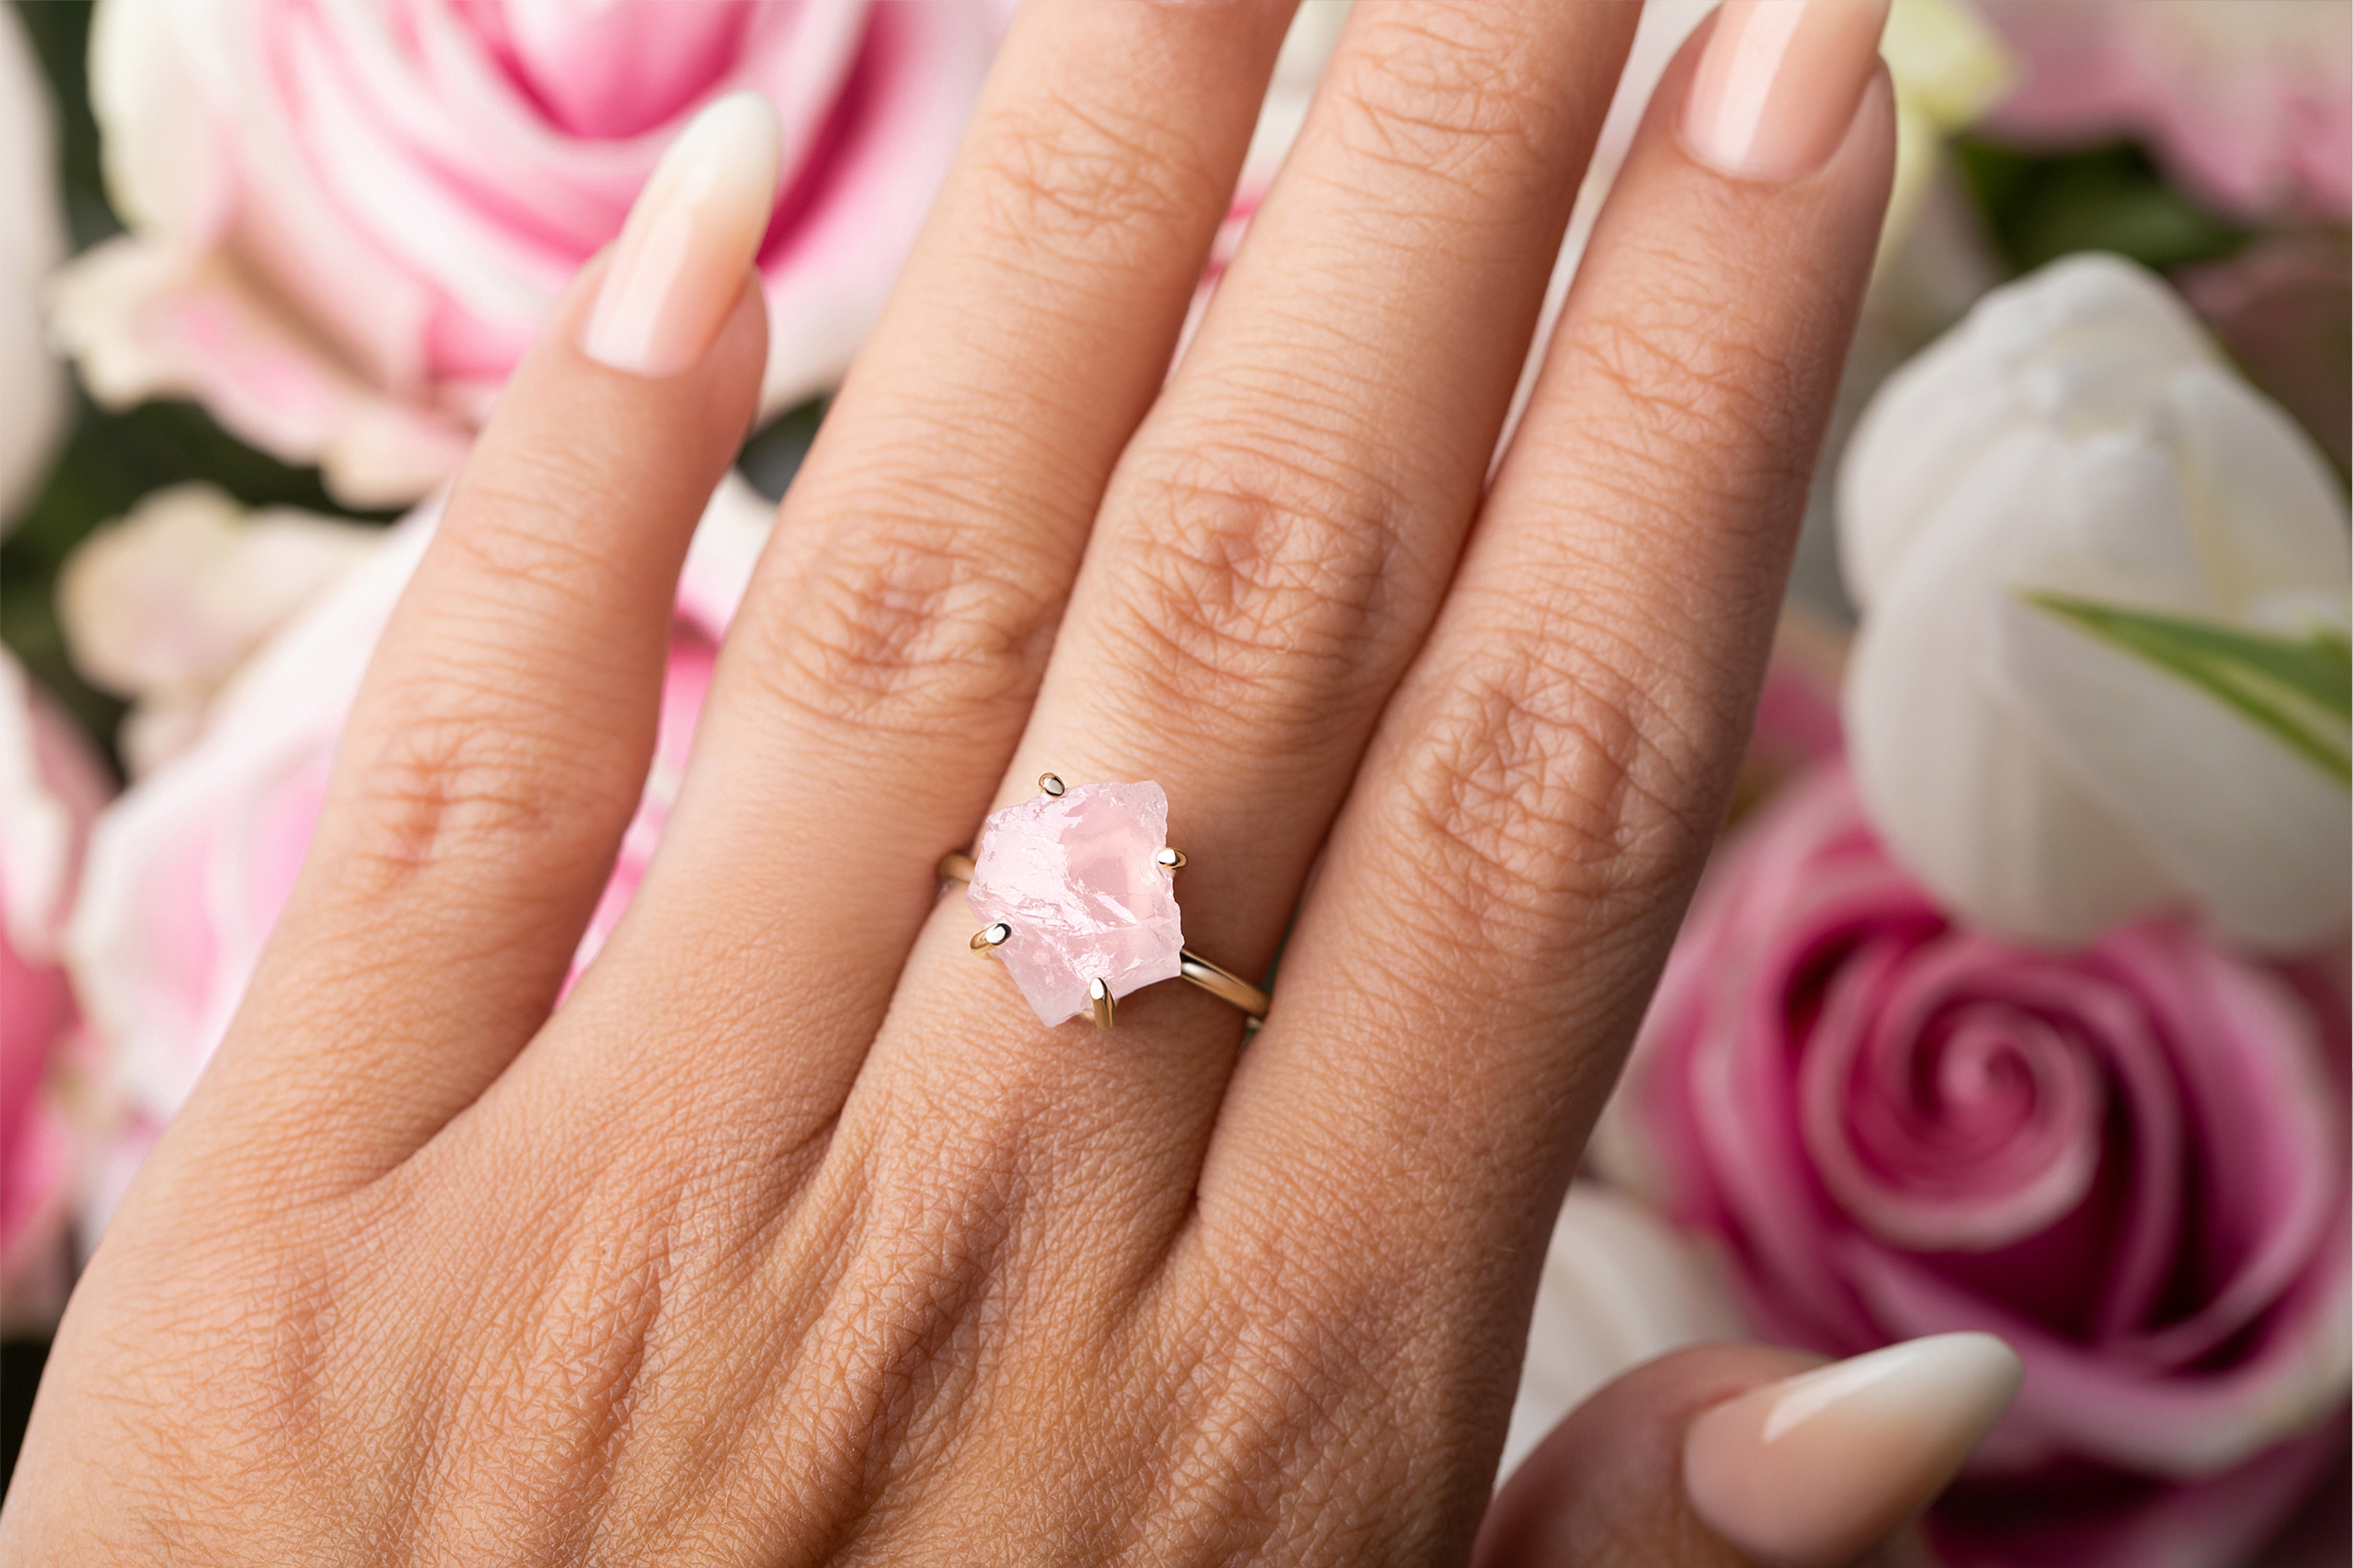 The Raw Crystal Ring Rose Quartz on a woman's hand.